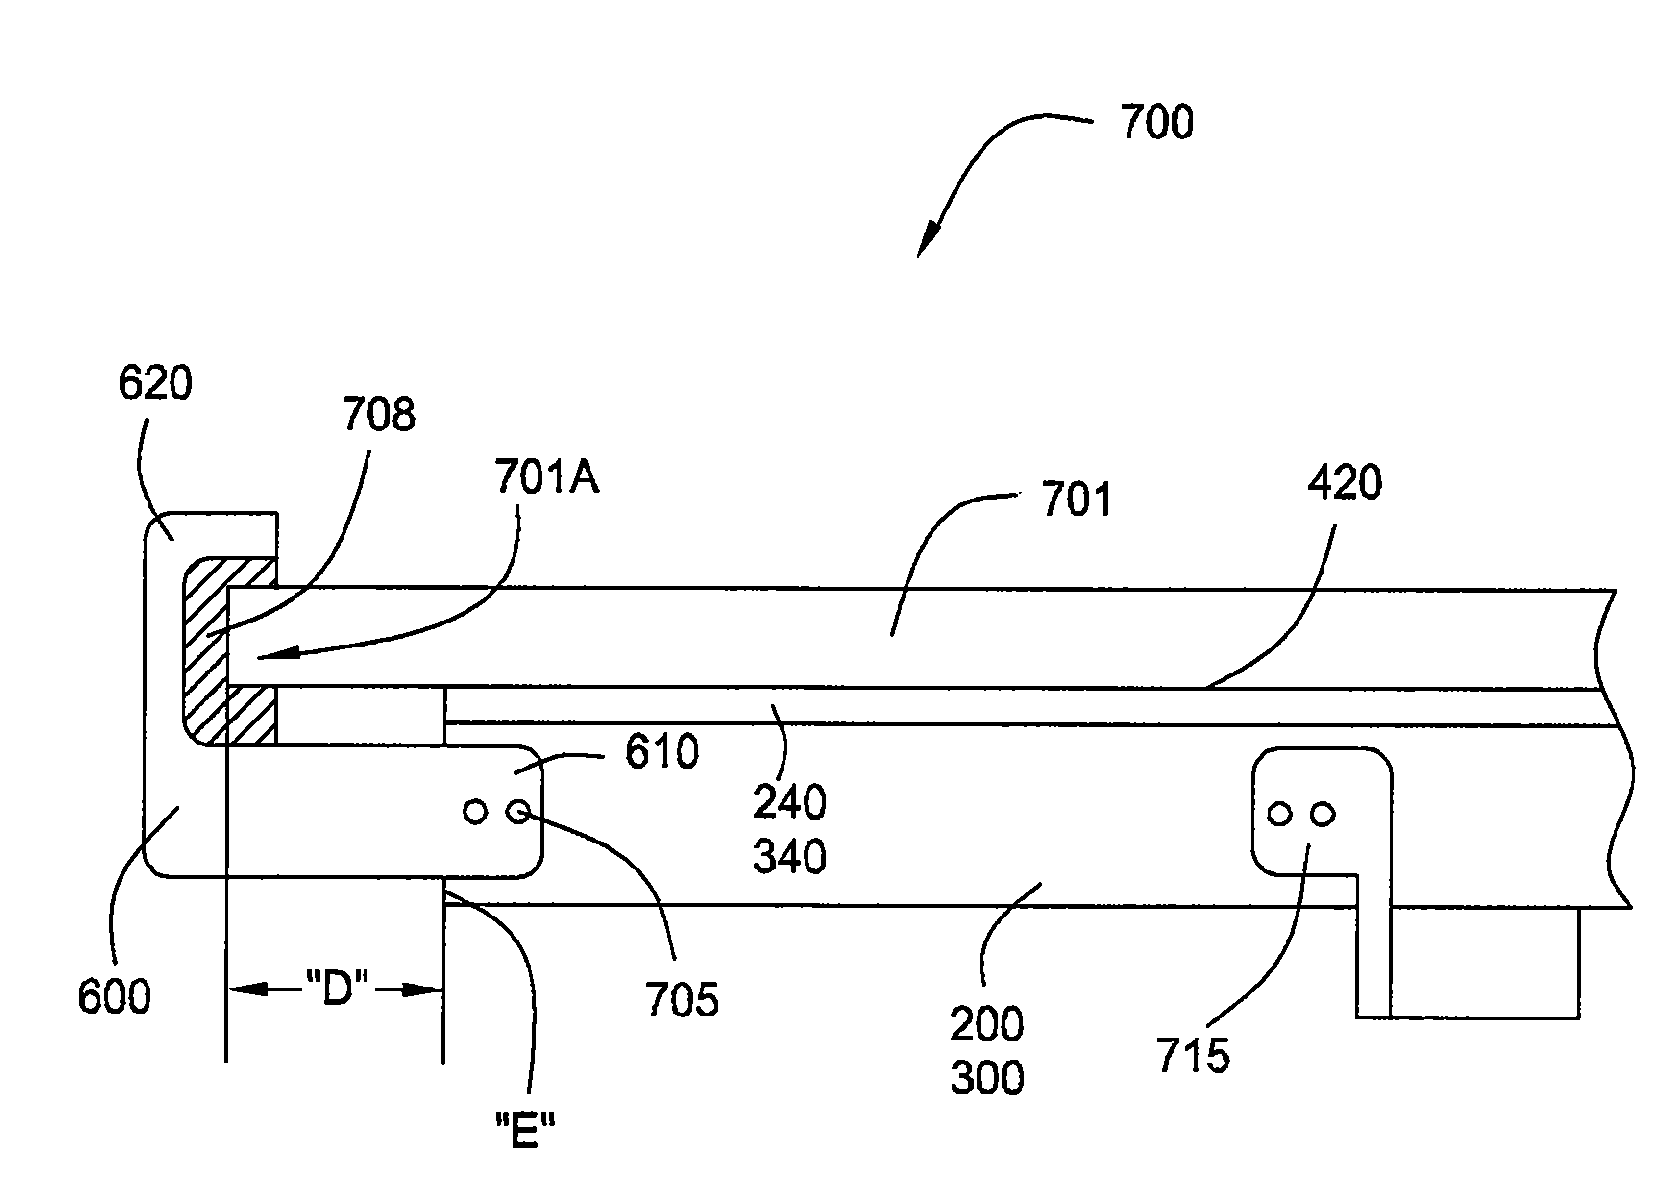 Apparatus and method of mounting and supporting a solar panel